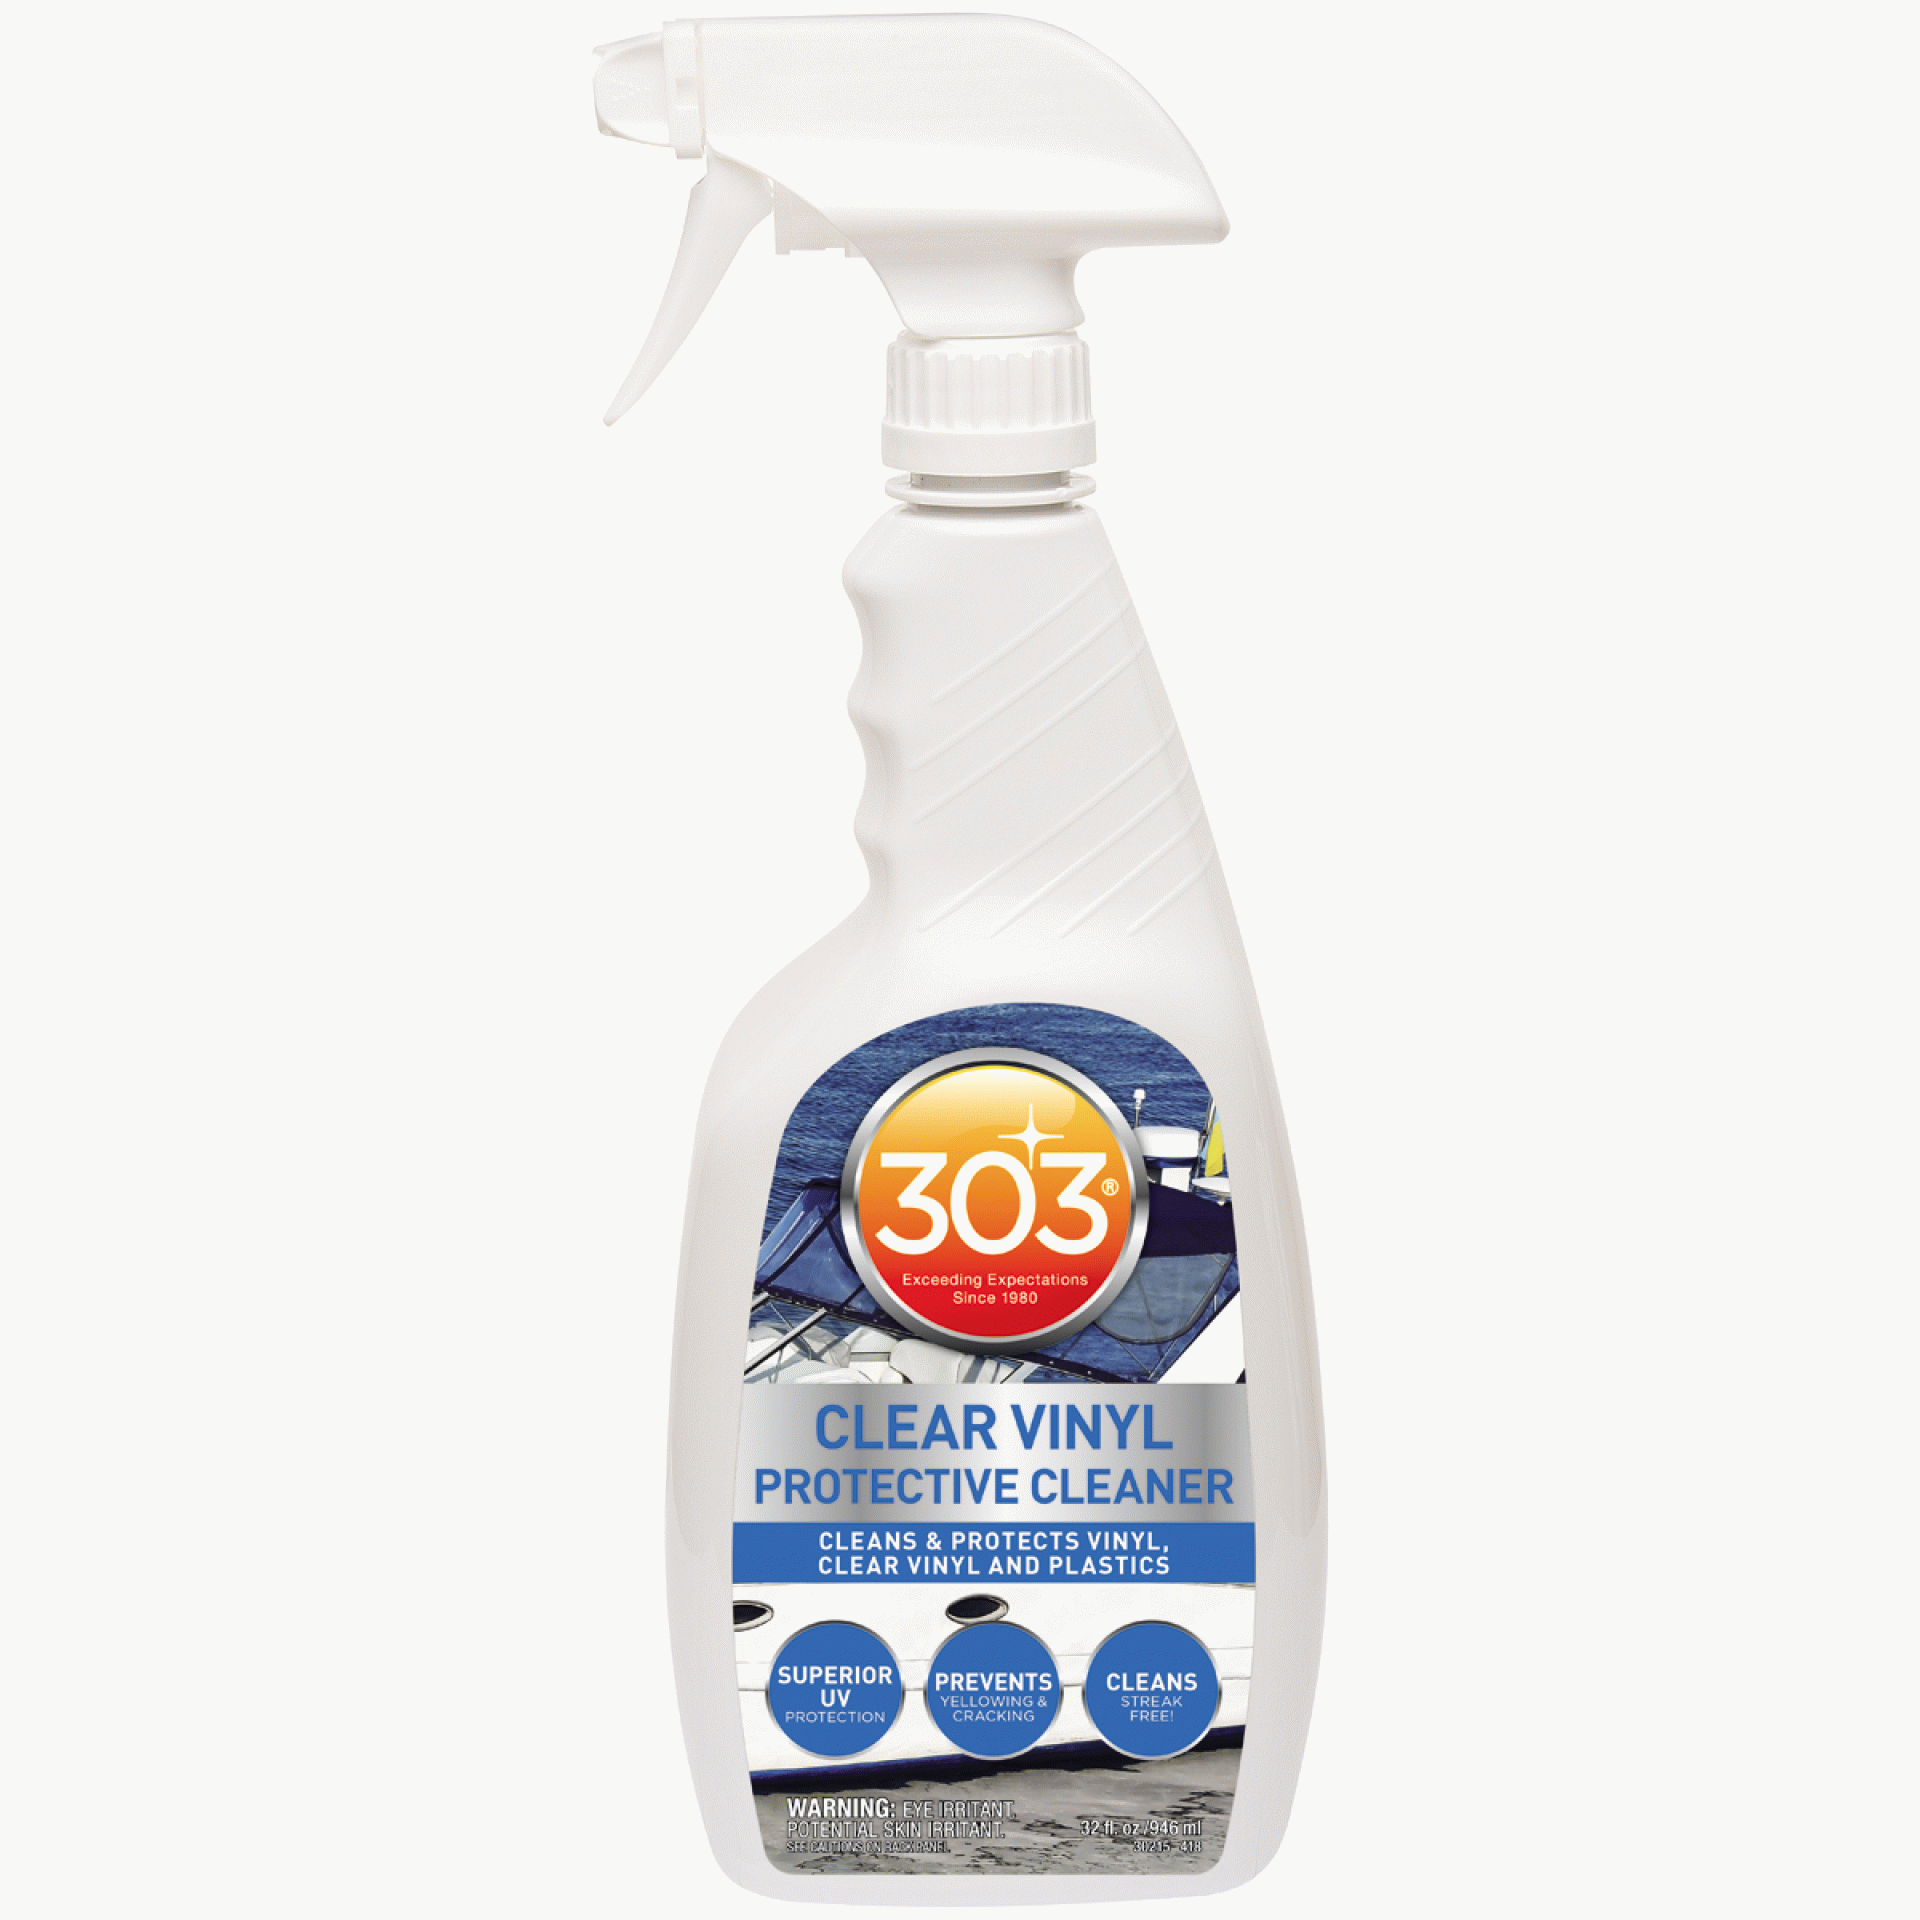 303 PRODUCTS INC. | 30215 | CLEAR VINYL AND PLASTIC PROTECTIVE CLEANER 32 Oz.